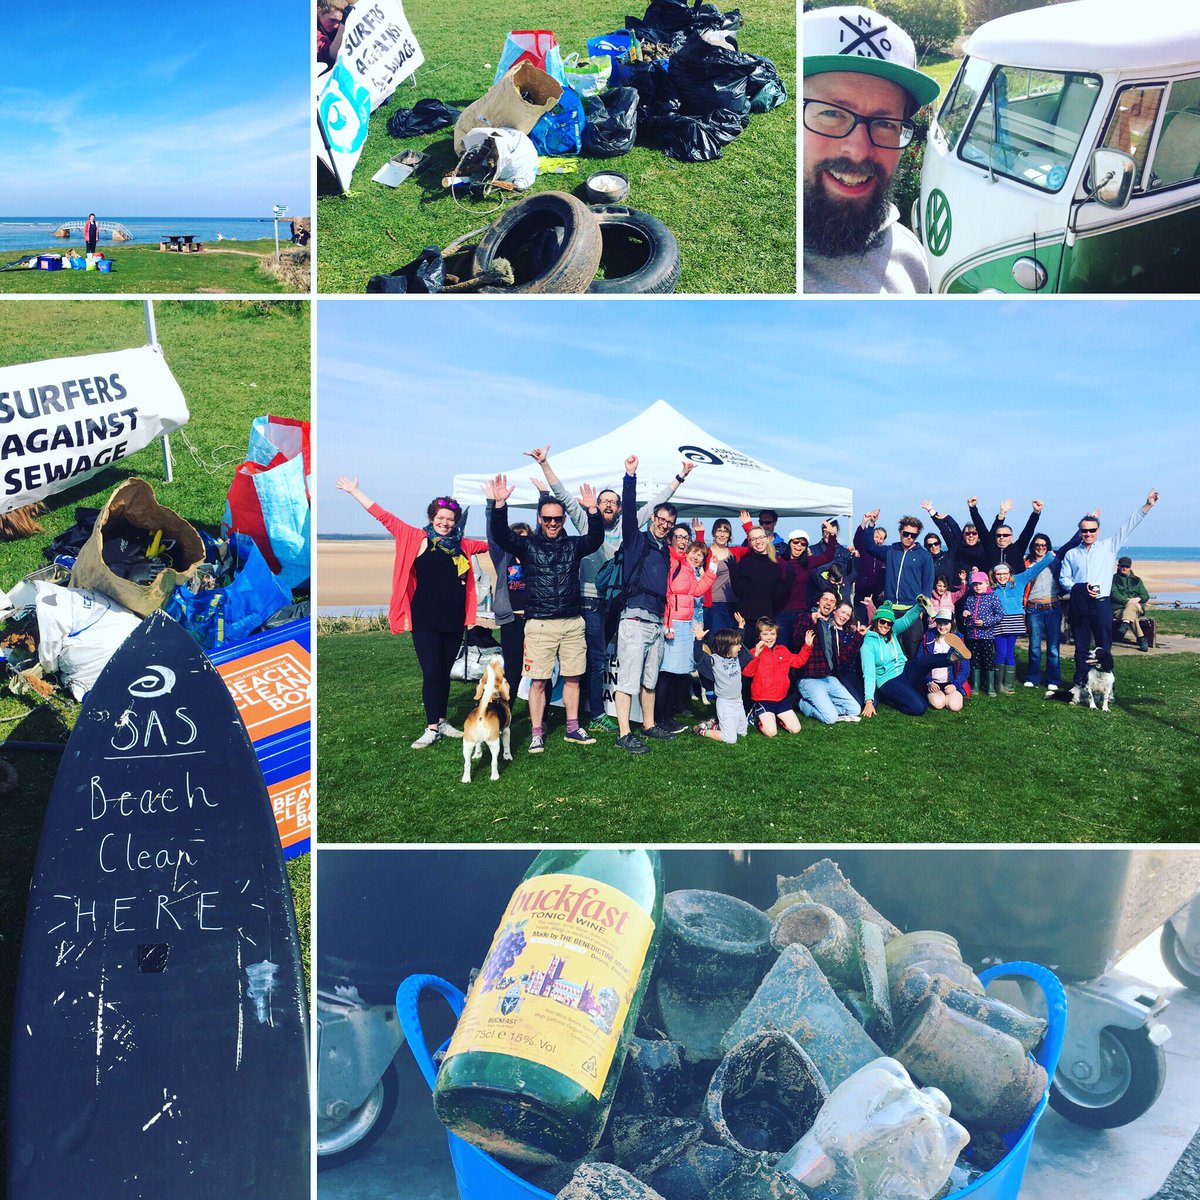 HUGE thx for joining @sascampaigns #bigspringbeachclean @ Belhaven today. What great individuals & community & what a lot of rubbish!!!